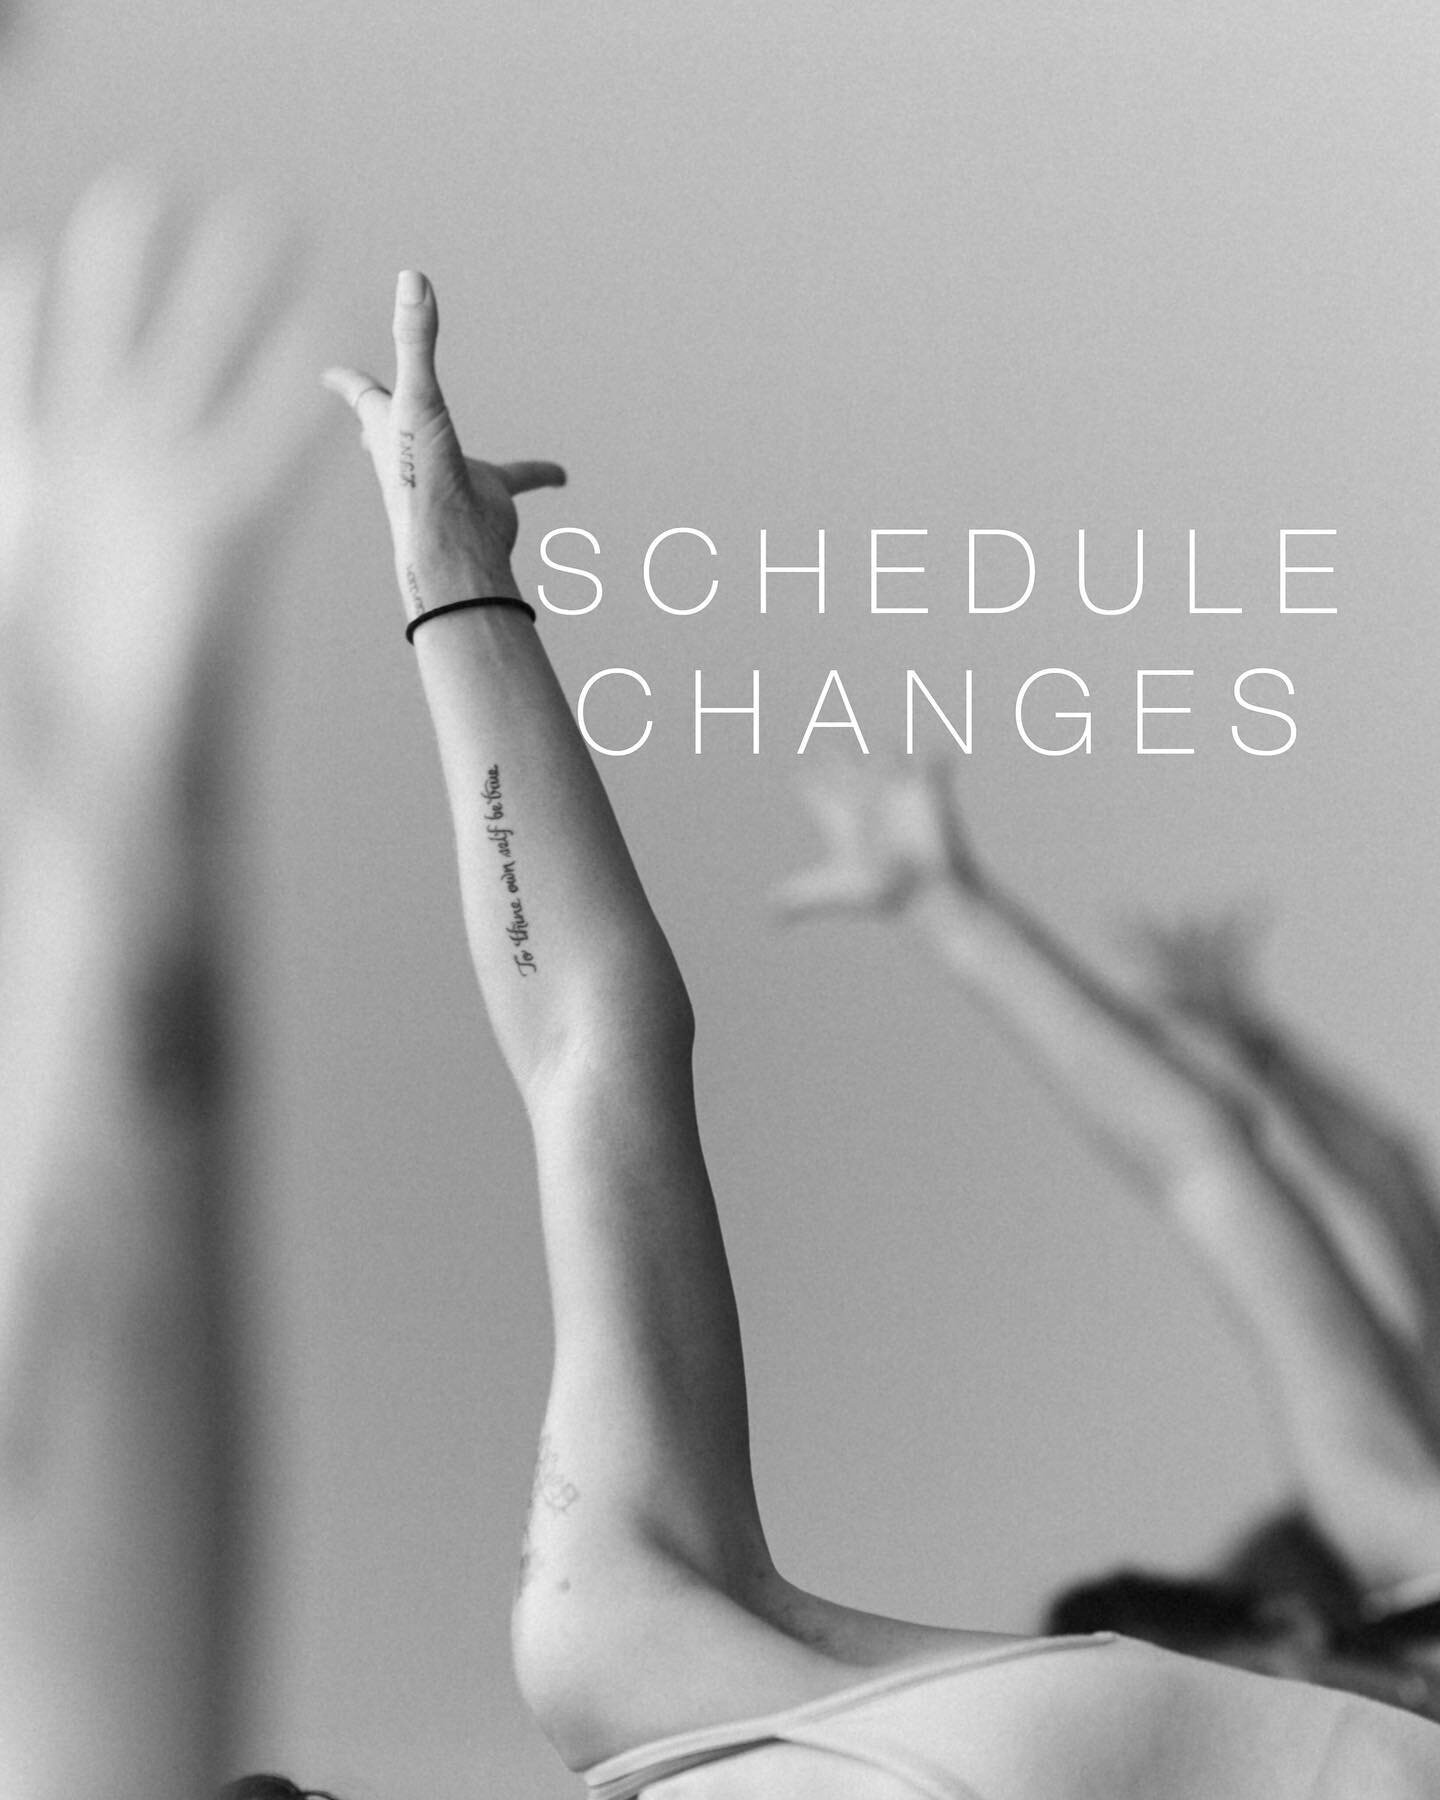 We&rsquo;ve got some big schedule changes happening NEXT WEEK! 

Check it out &mdash;
💫 Sunday 11a Fusion now rotated with Ali Walker and (welcome back &lt;3 ) Marghertia Vicari
💫 Monday 4p Calm now led by Audrey Choate
💫 Monday 7p Calm now led by